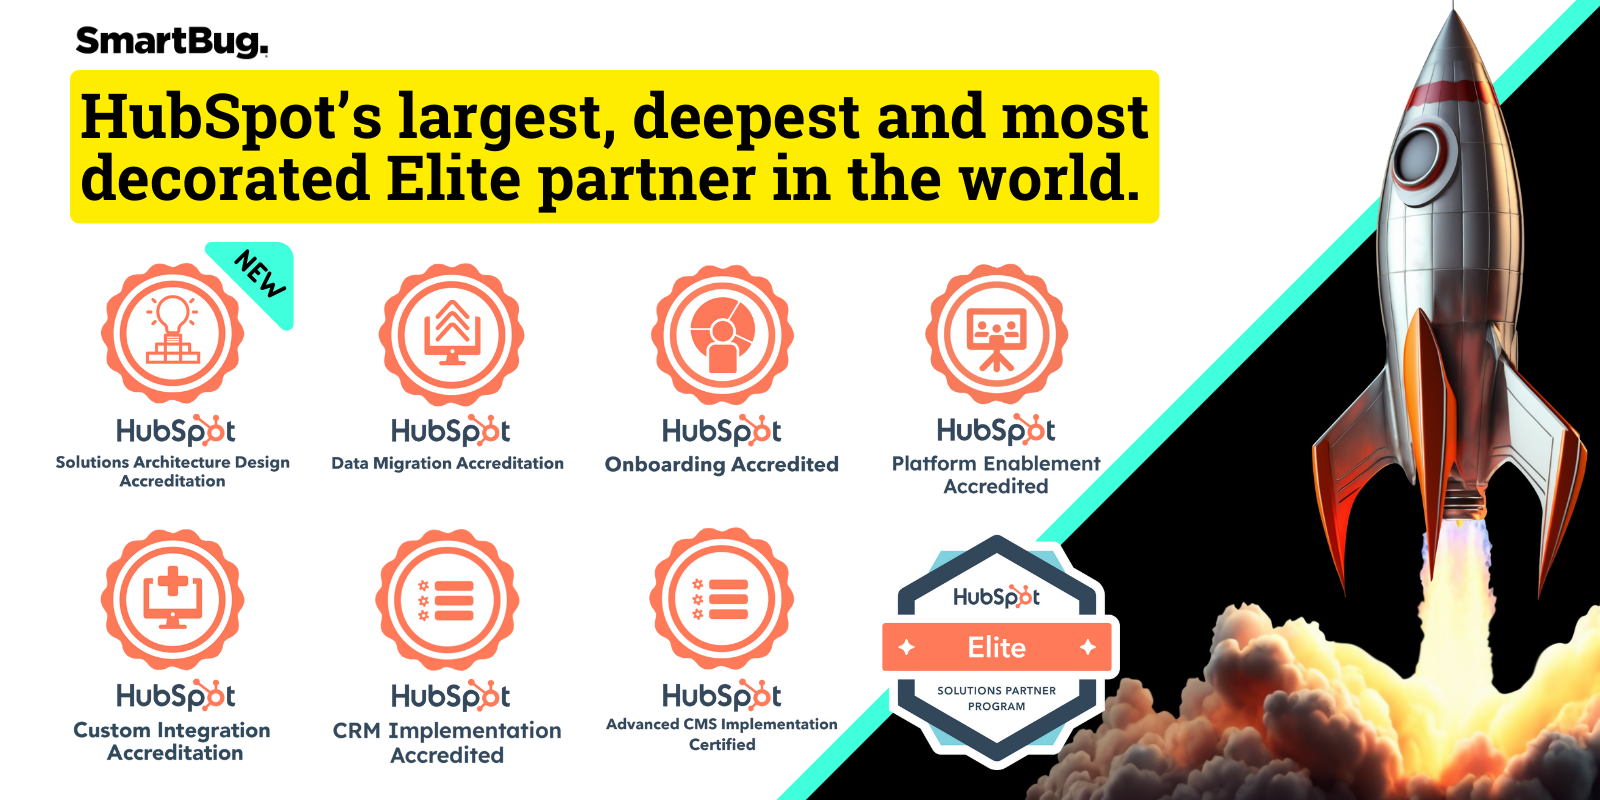 Banner image showing SmartBug as HubSpot's largest, deepest, and most decorated Elite partner in the world